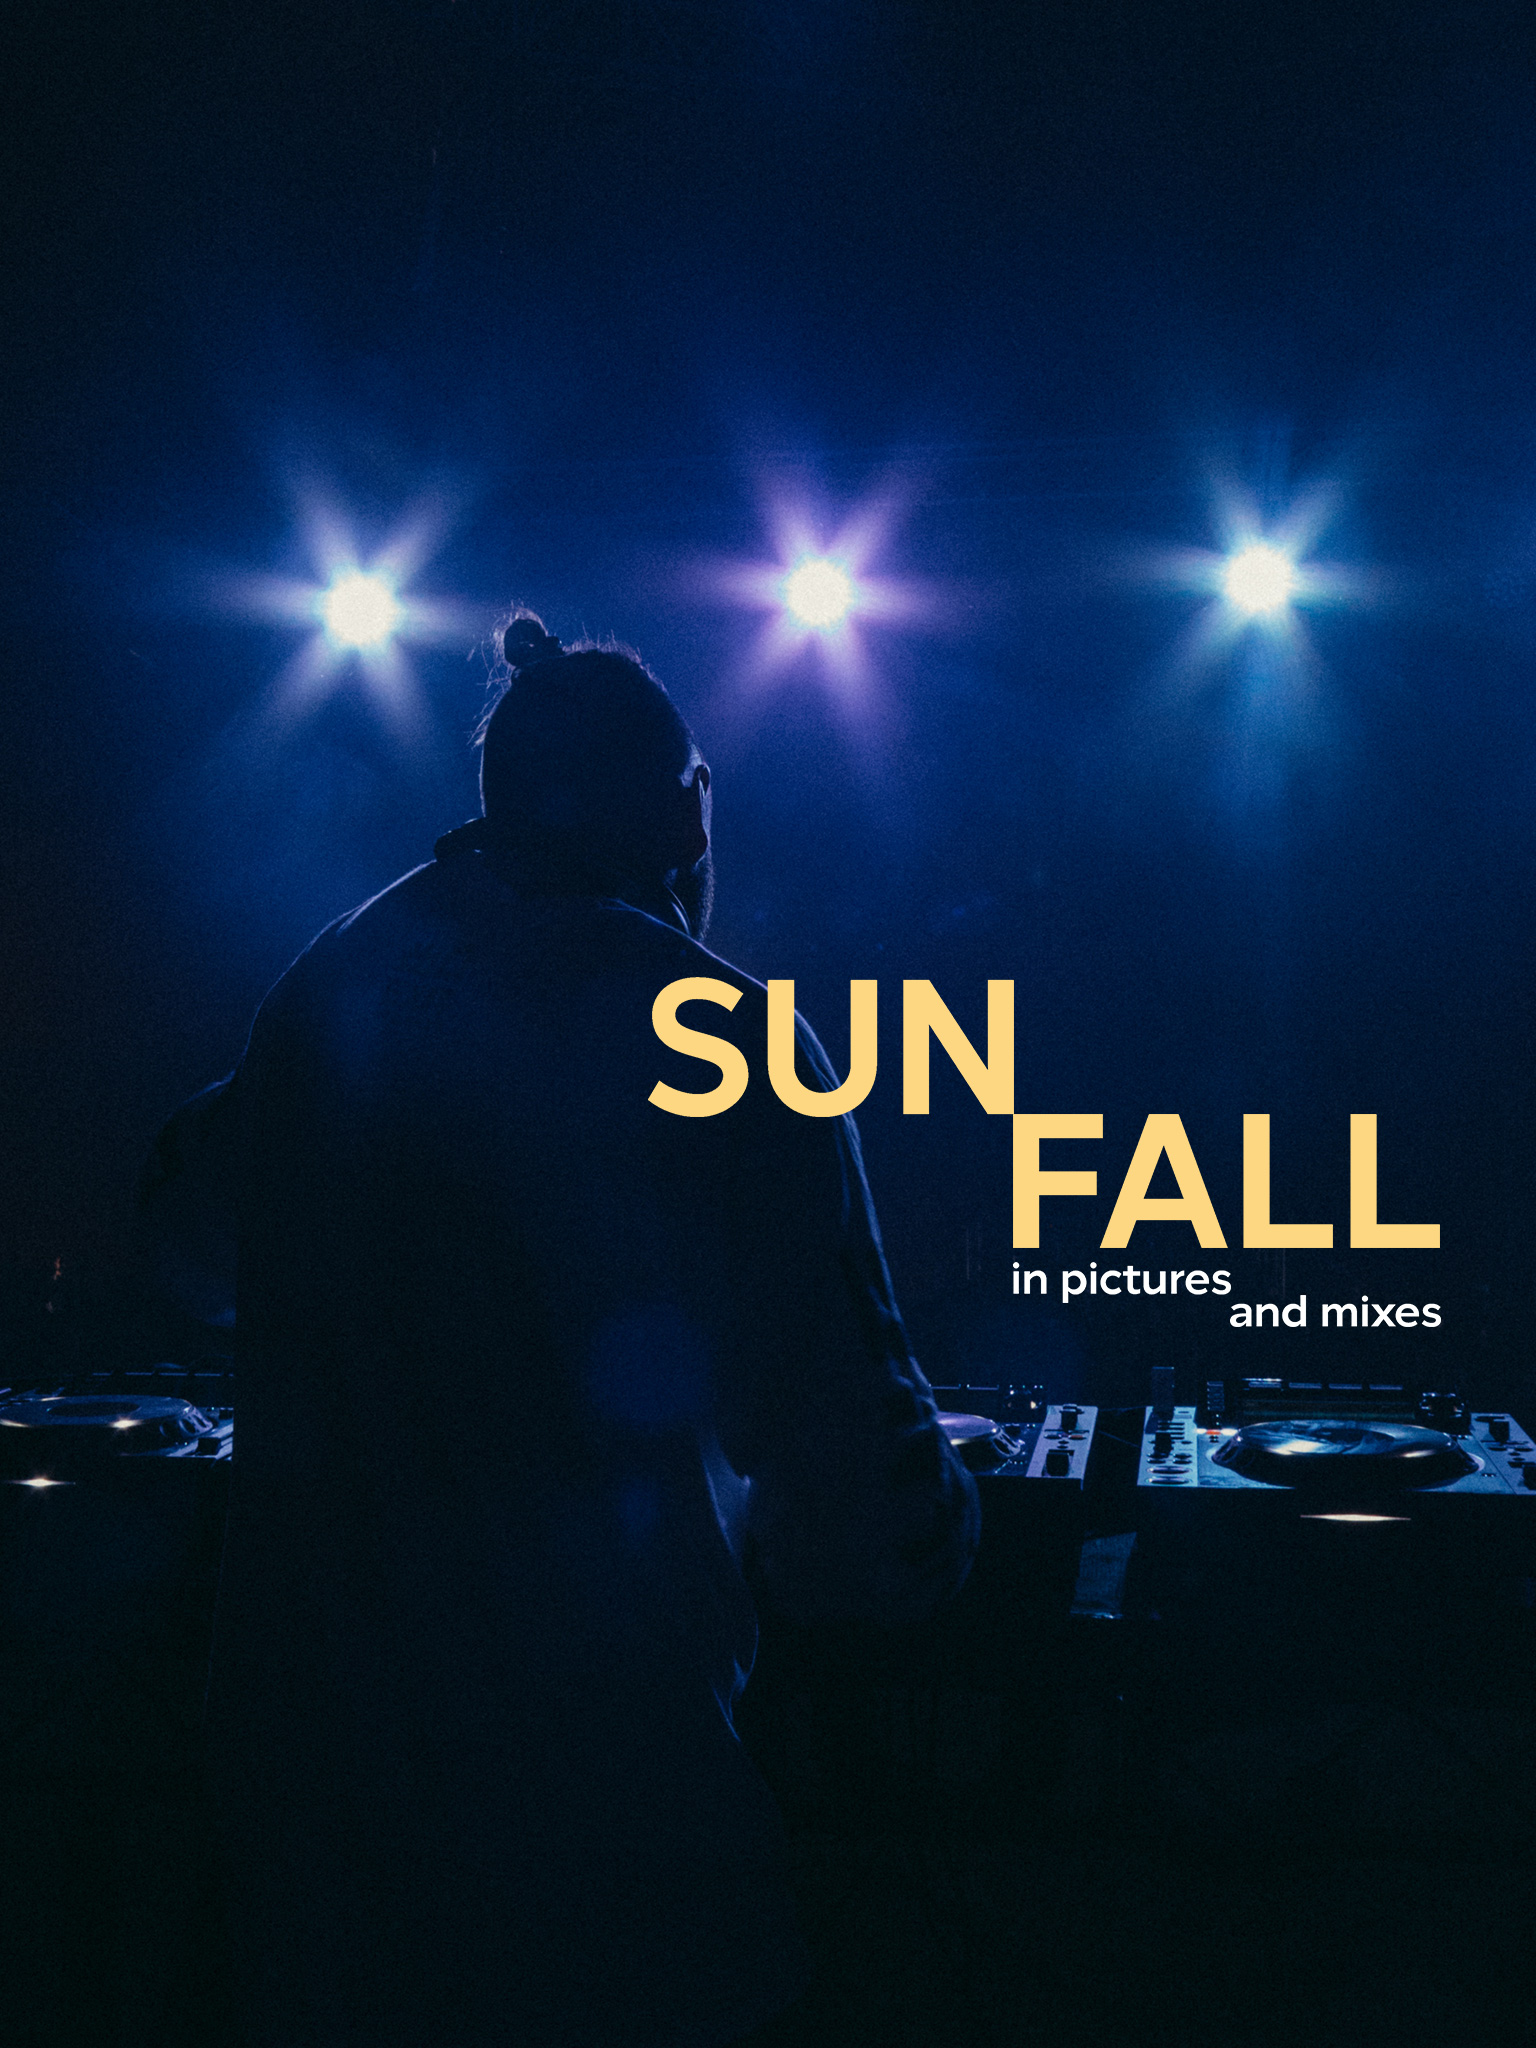 Sunfall in pictures and mixes